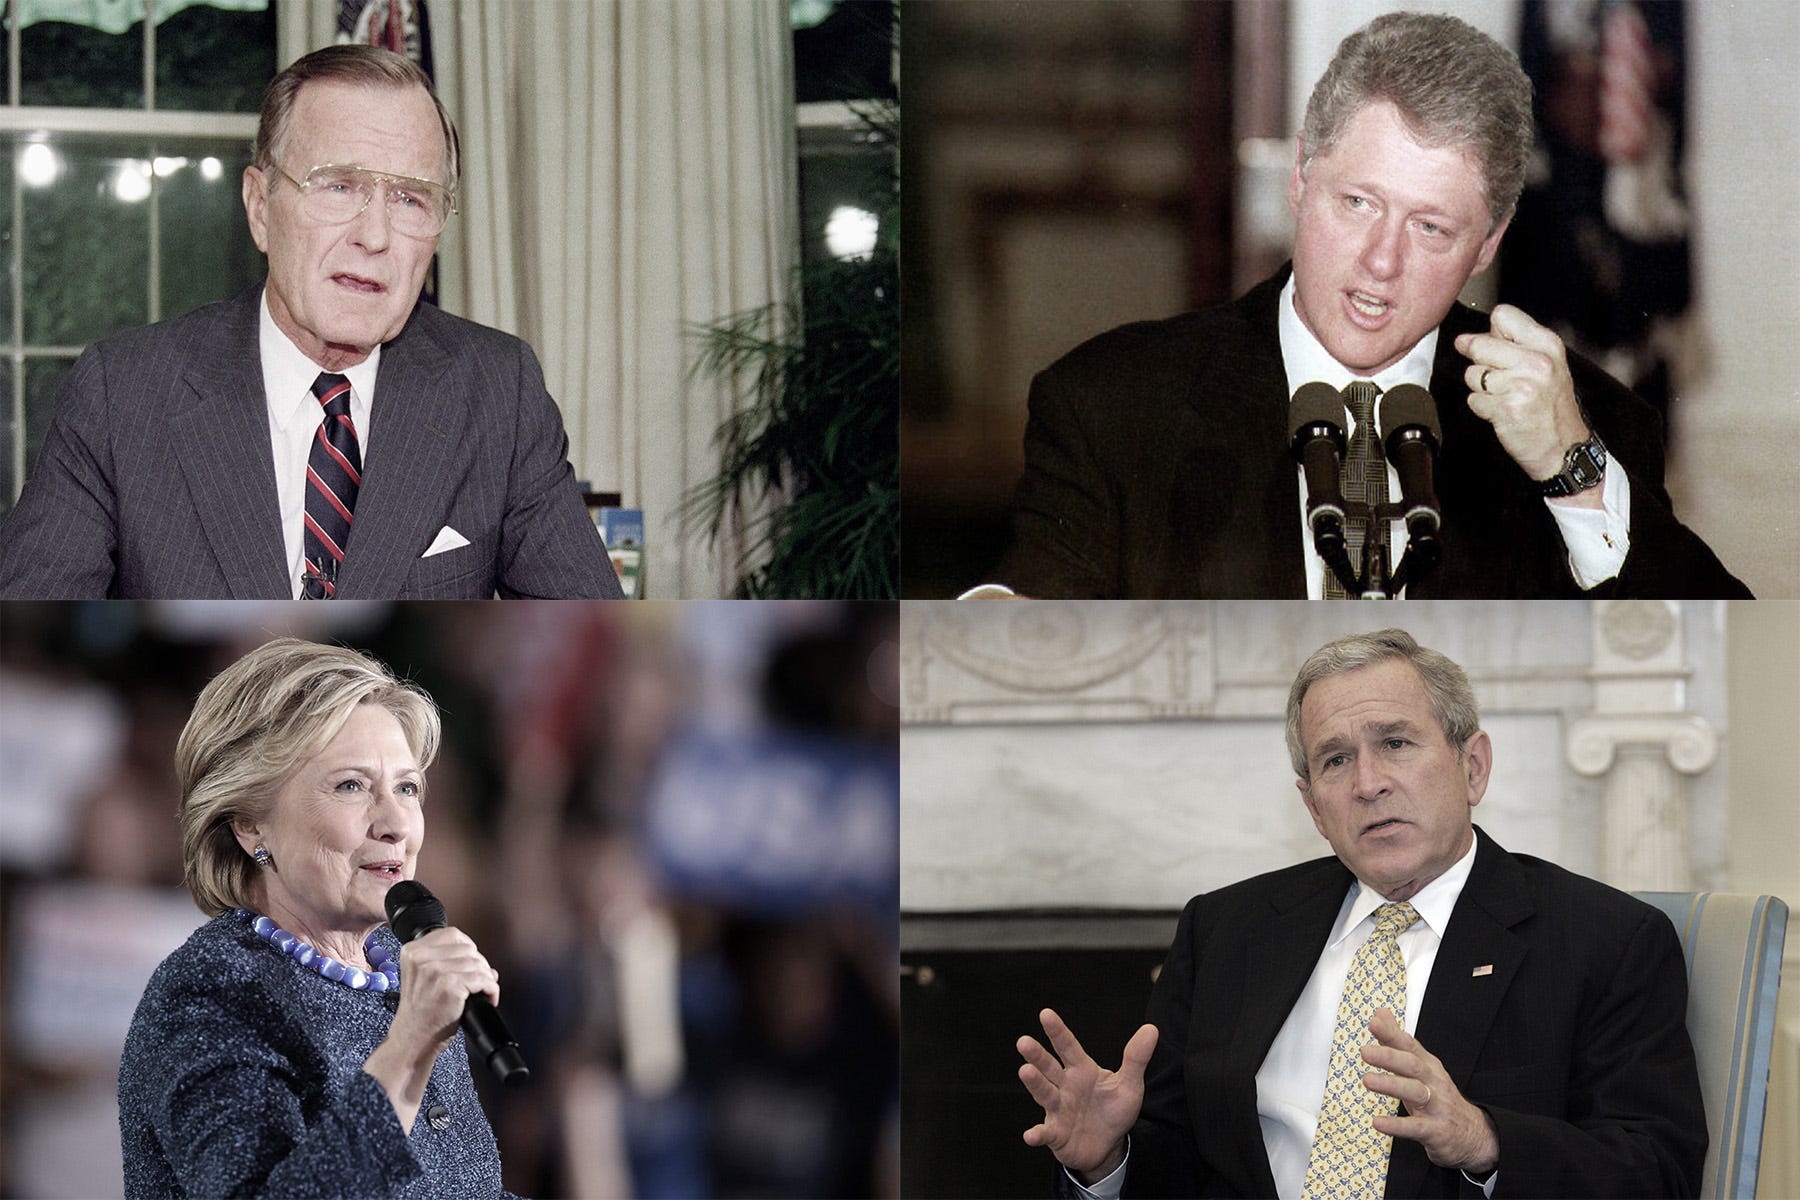 Stage is set for first White House race since 1976 without a Bush, Clinton or Biden on ballot